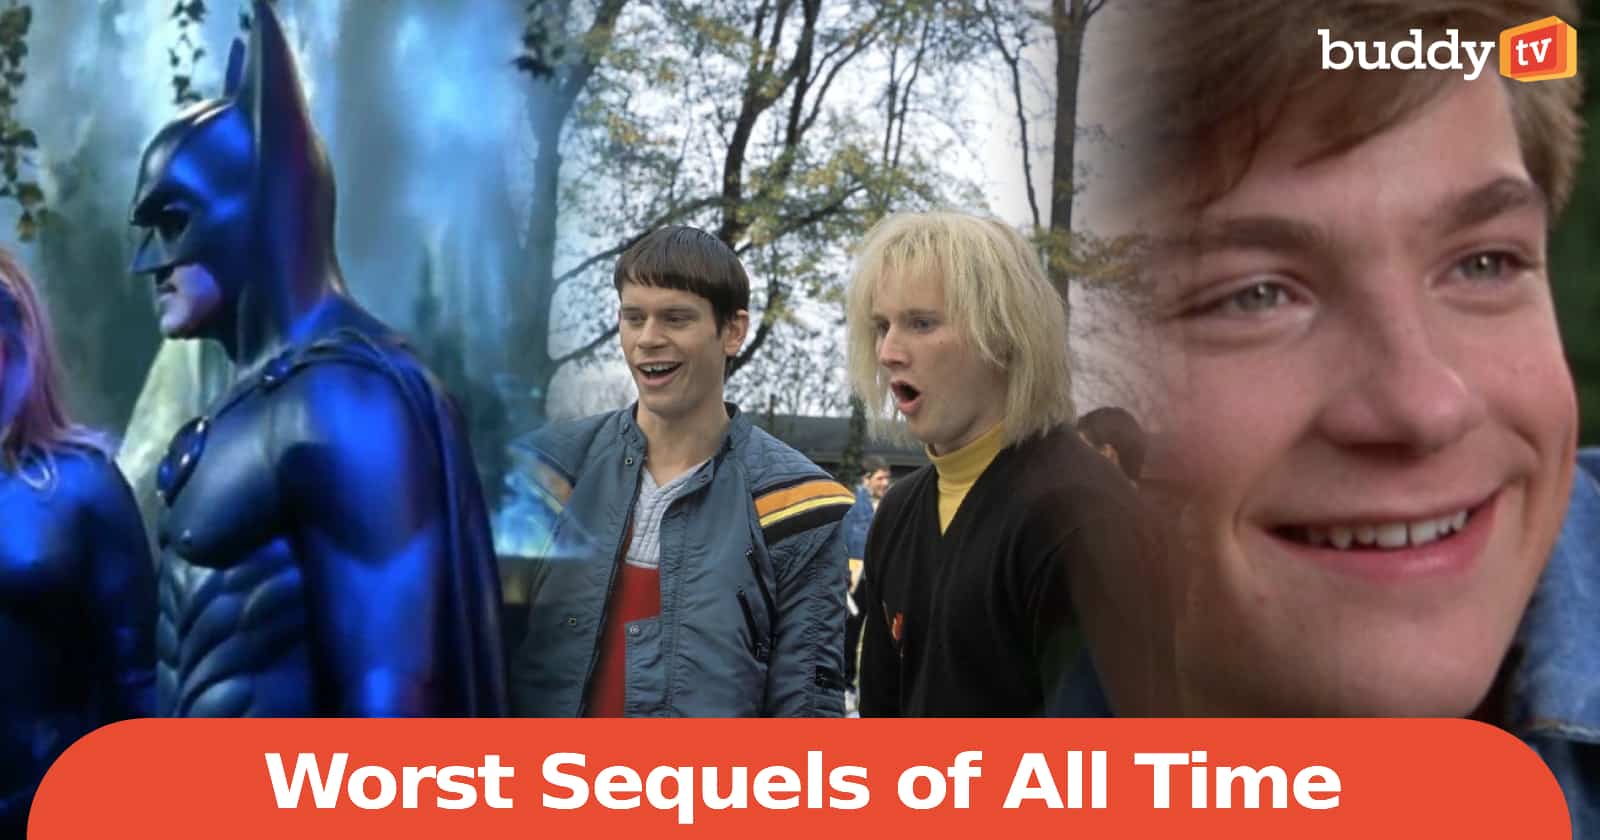 10 Worst Sequels of All Time, Ranked by Viewers